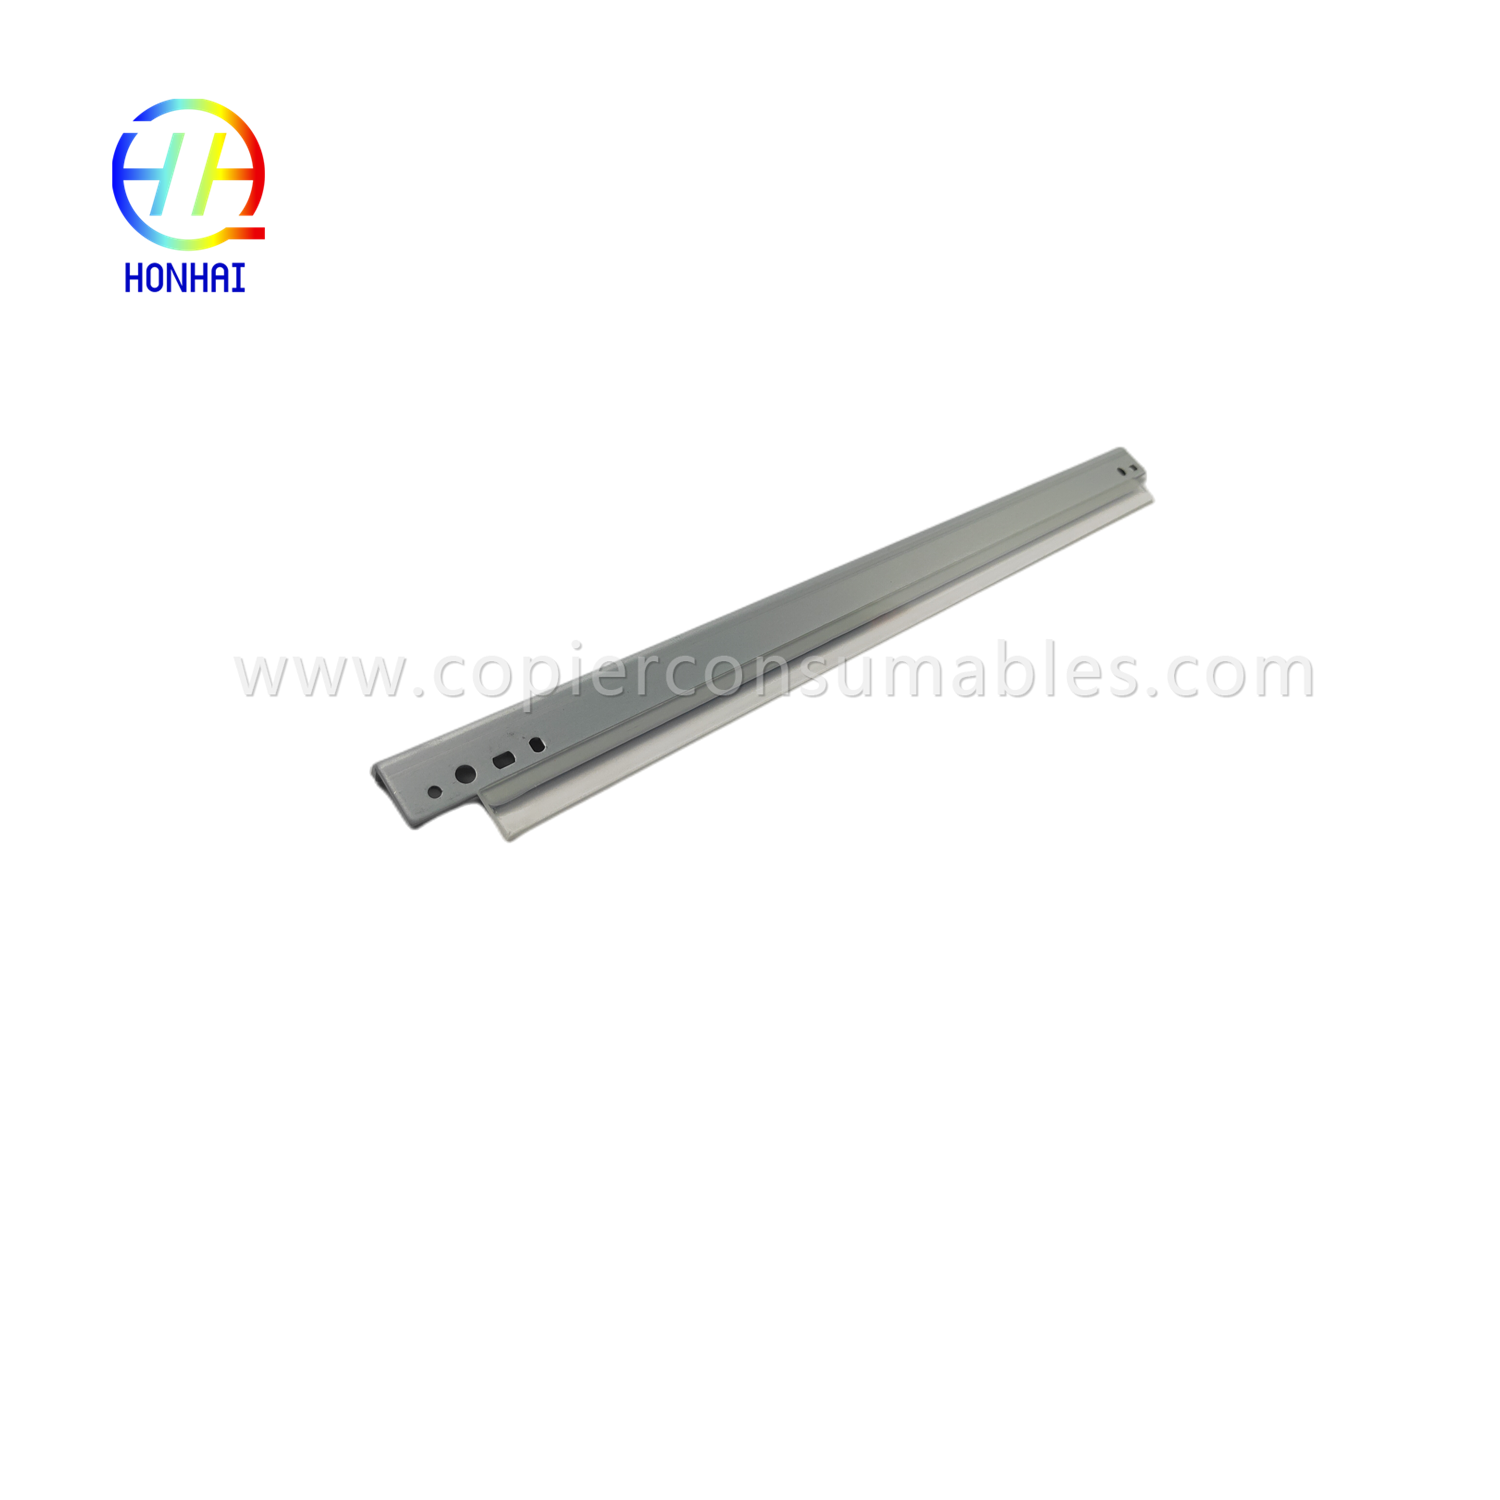 https://c585.goodao.net/drum-cleaning-blade-for-canon-ir-2520-2525-2535-2545-2530-2540-product/